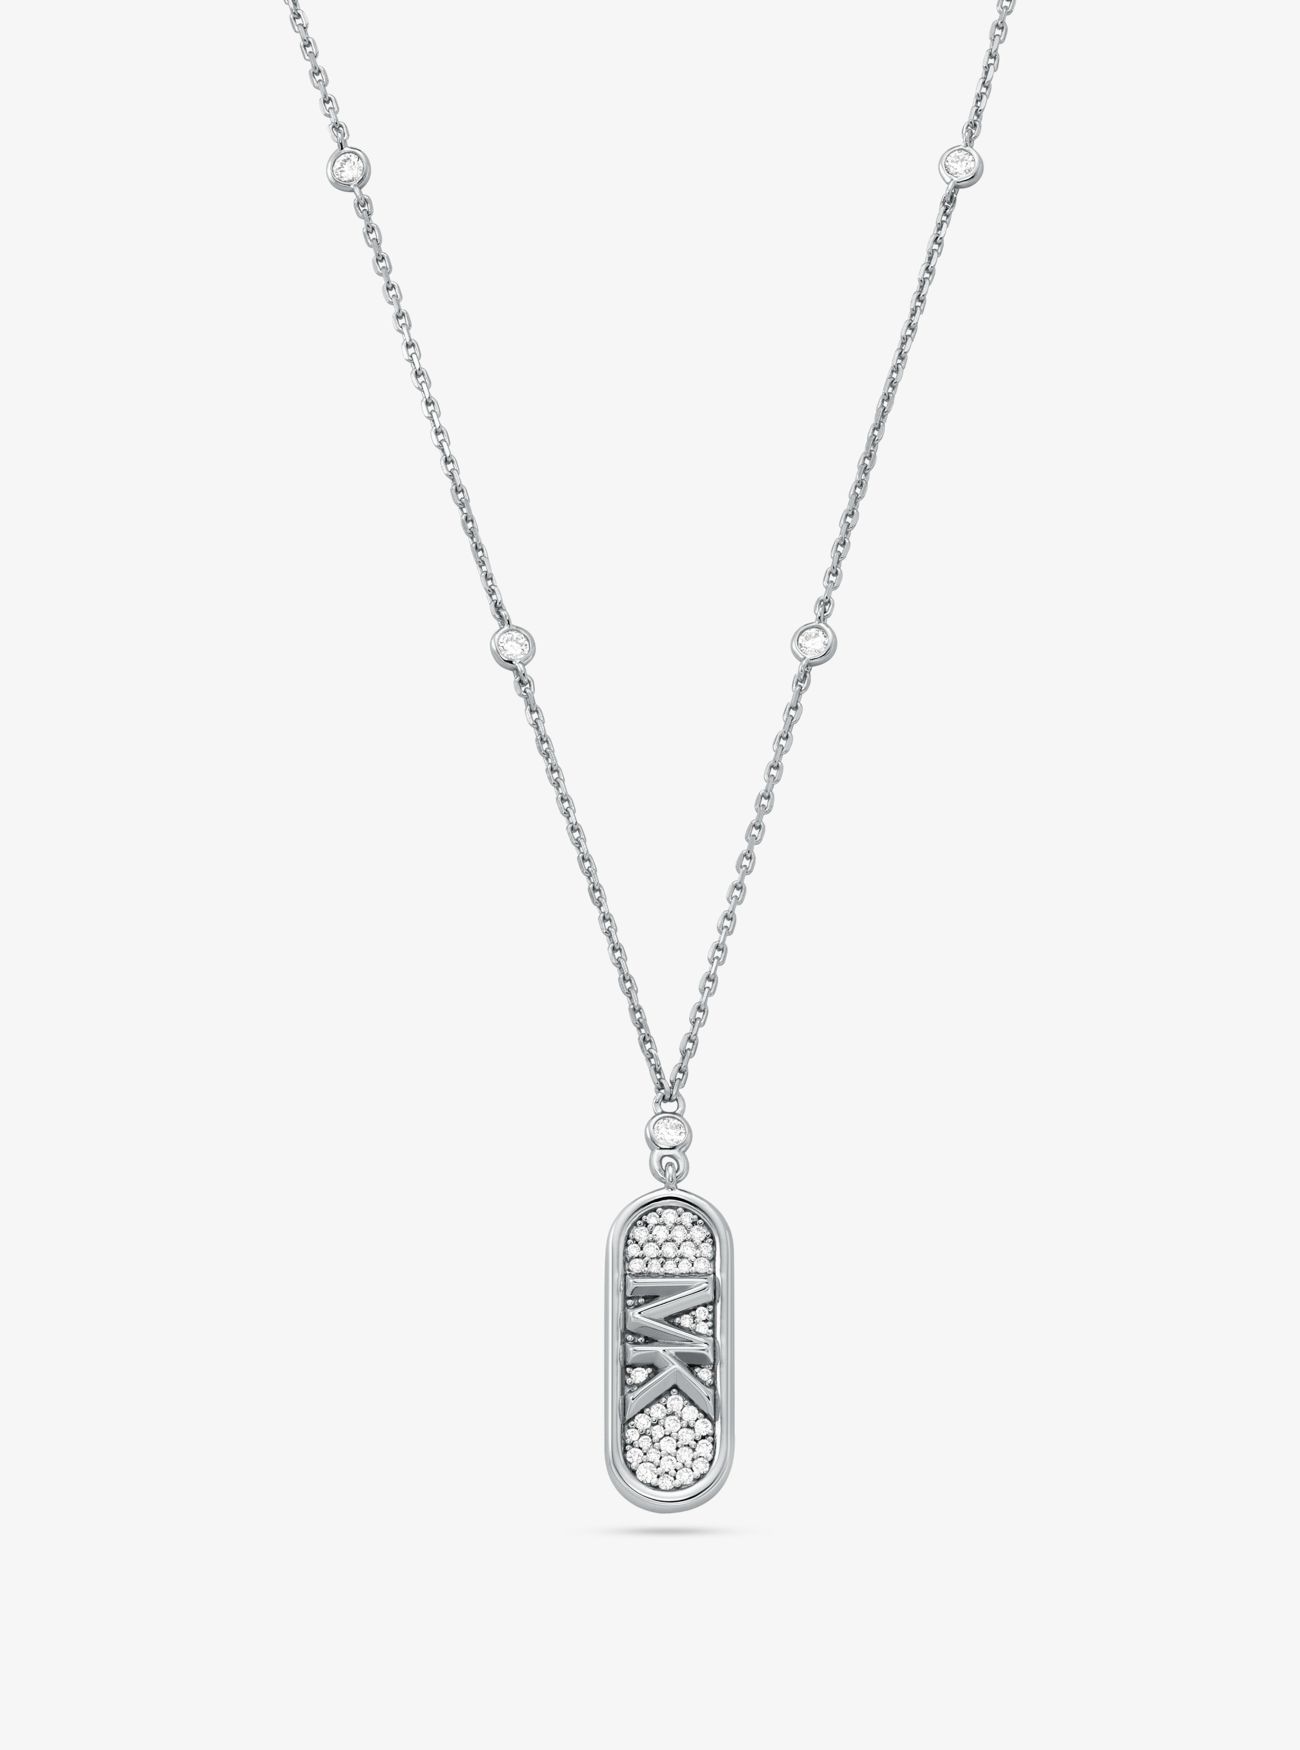 MK Pavé Precious Metal-Plated and Sterling Silver Empire Logo Necklace - Silver - Michael Kors